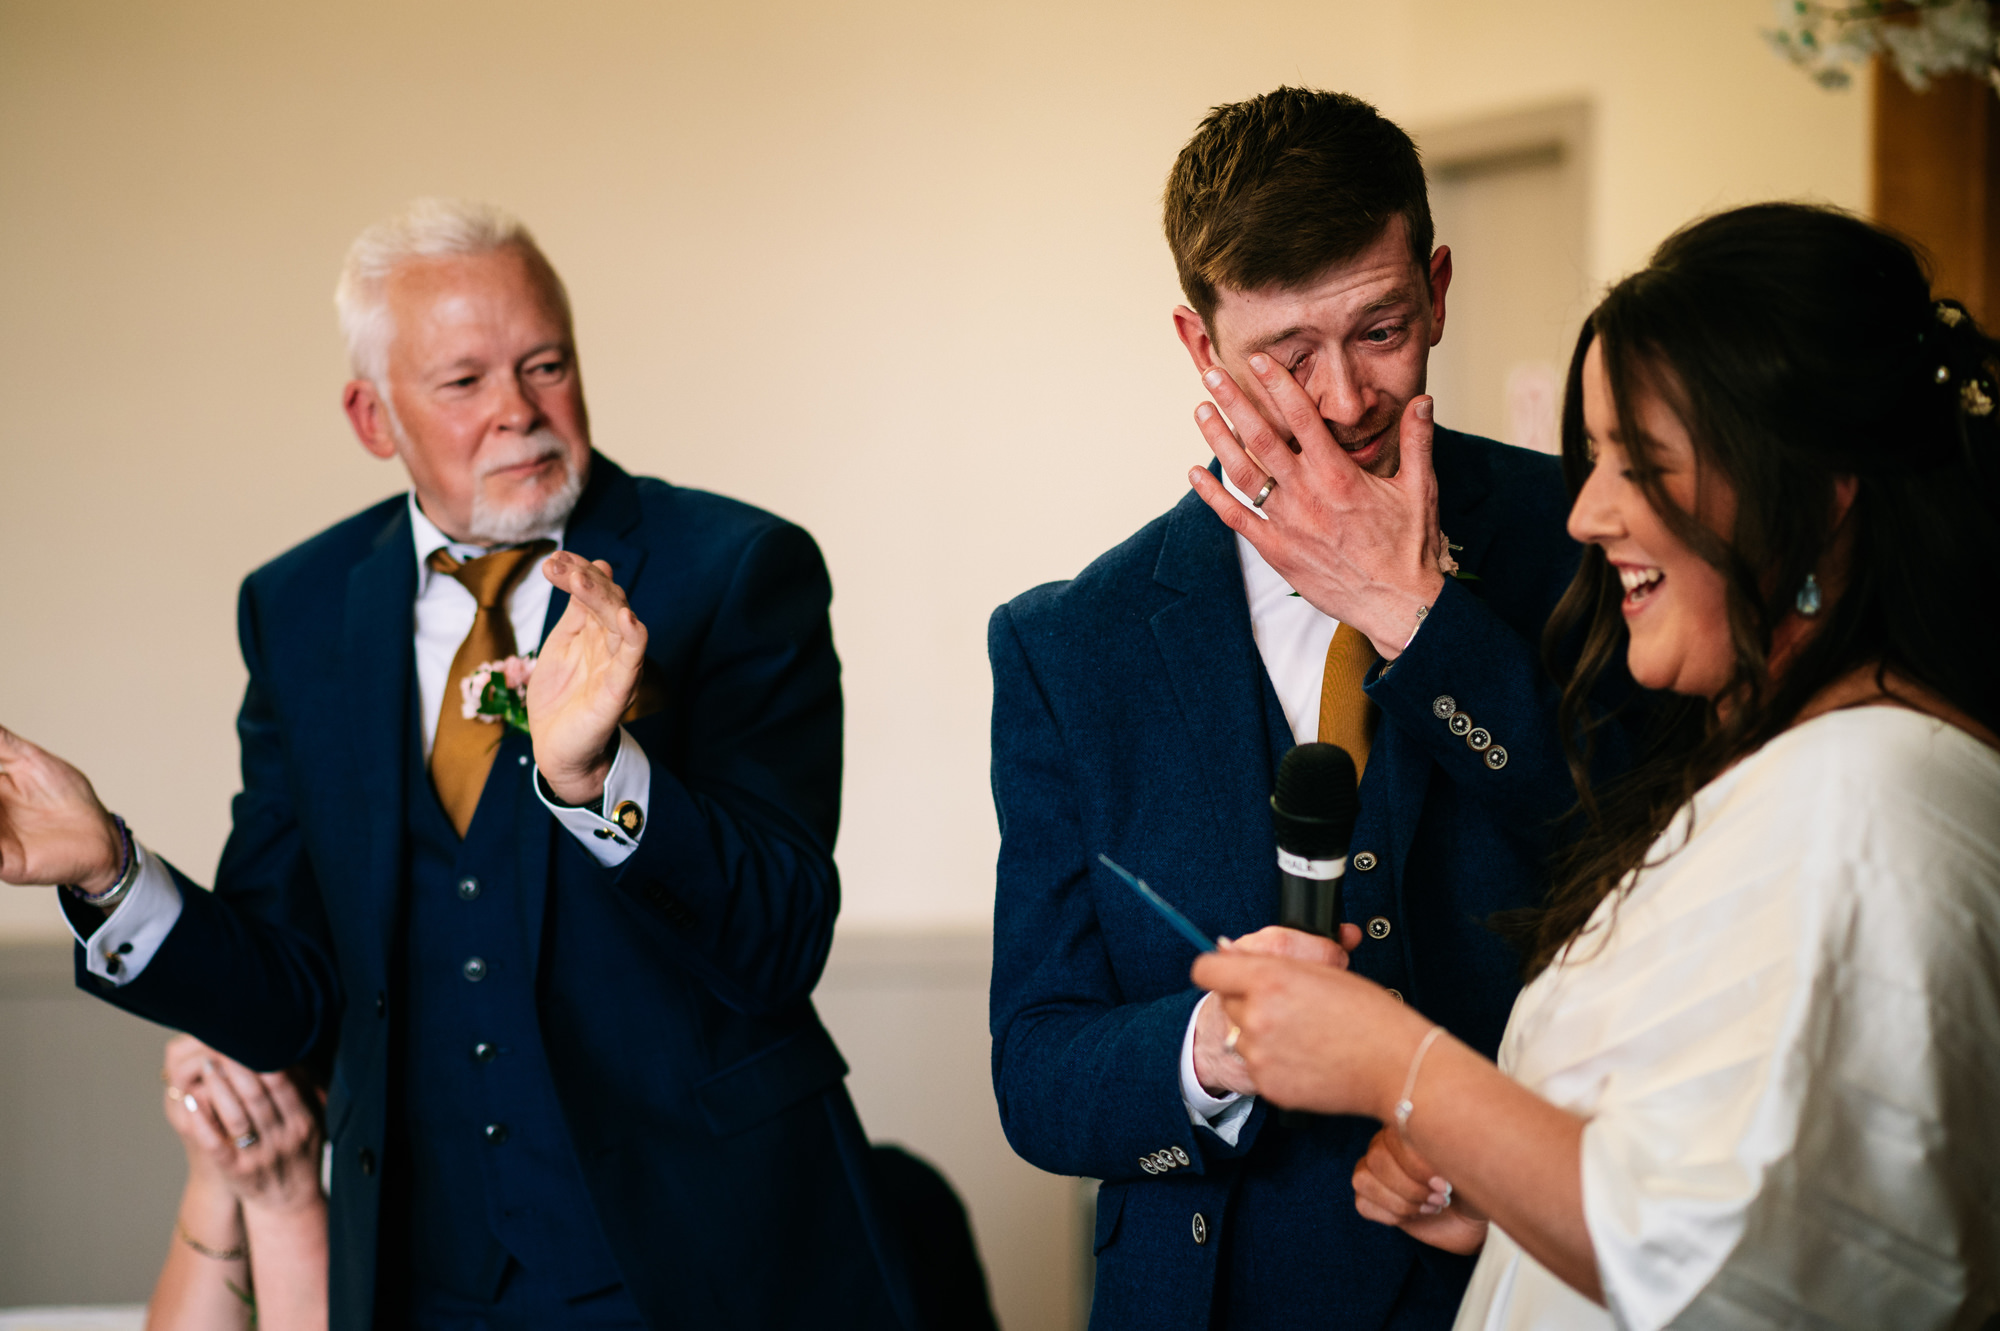 groom wiping away a tear after his father's speech